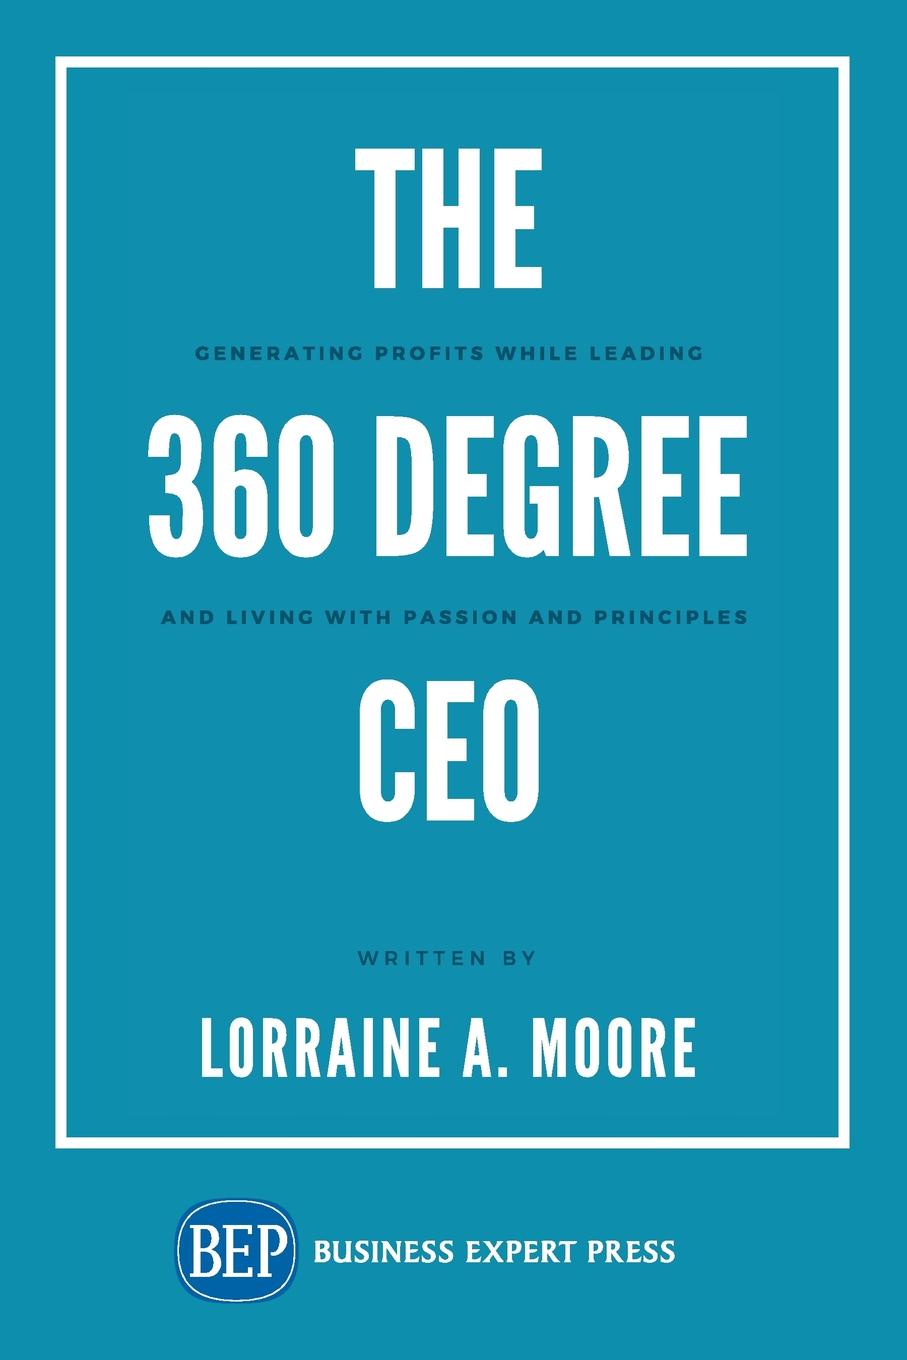 The 360 Degree CEO. Generating Profits While Leading and Living with Passion and Principles